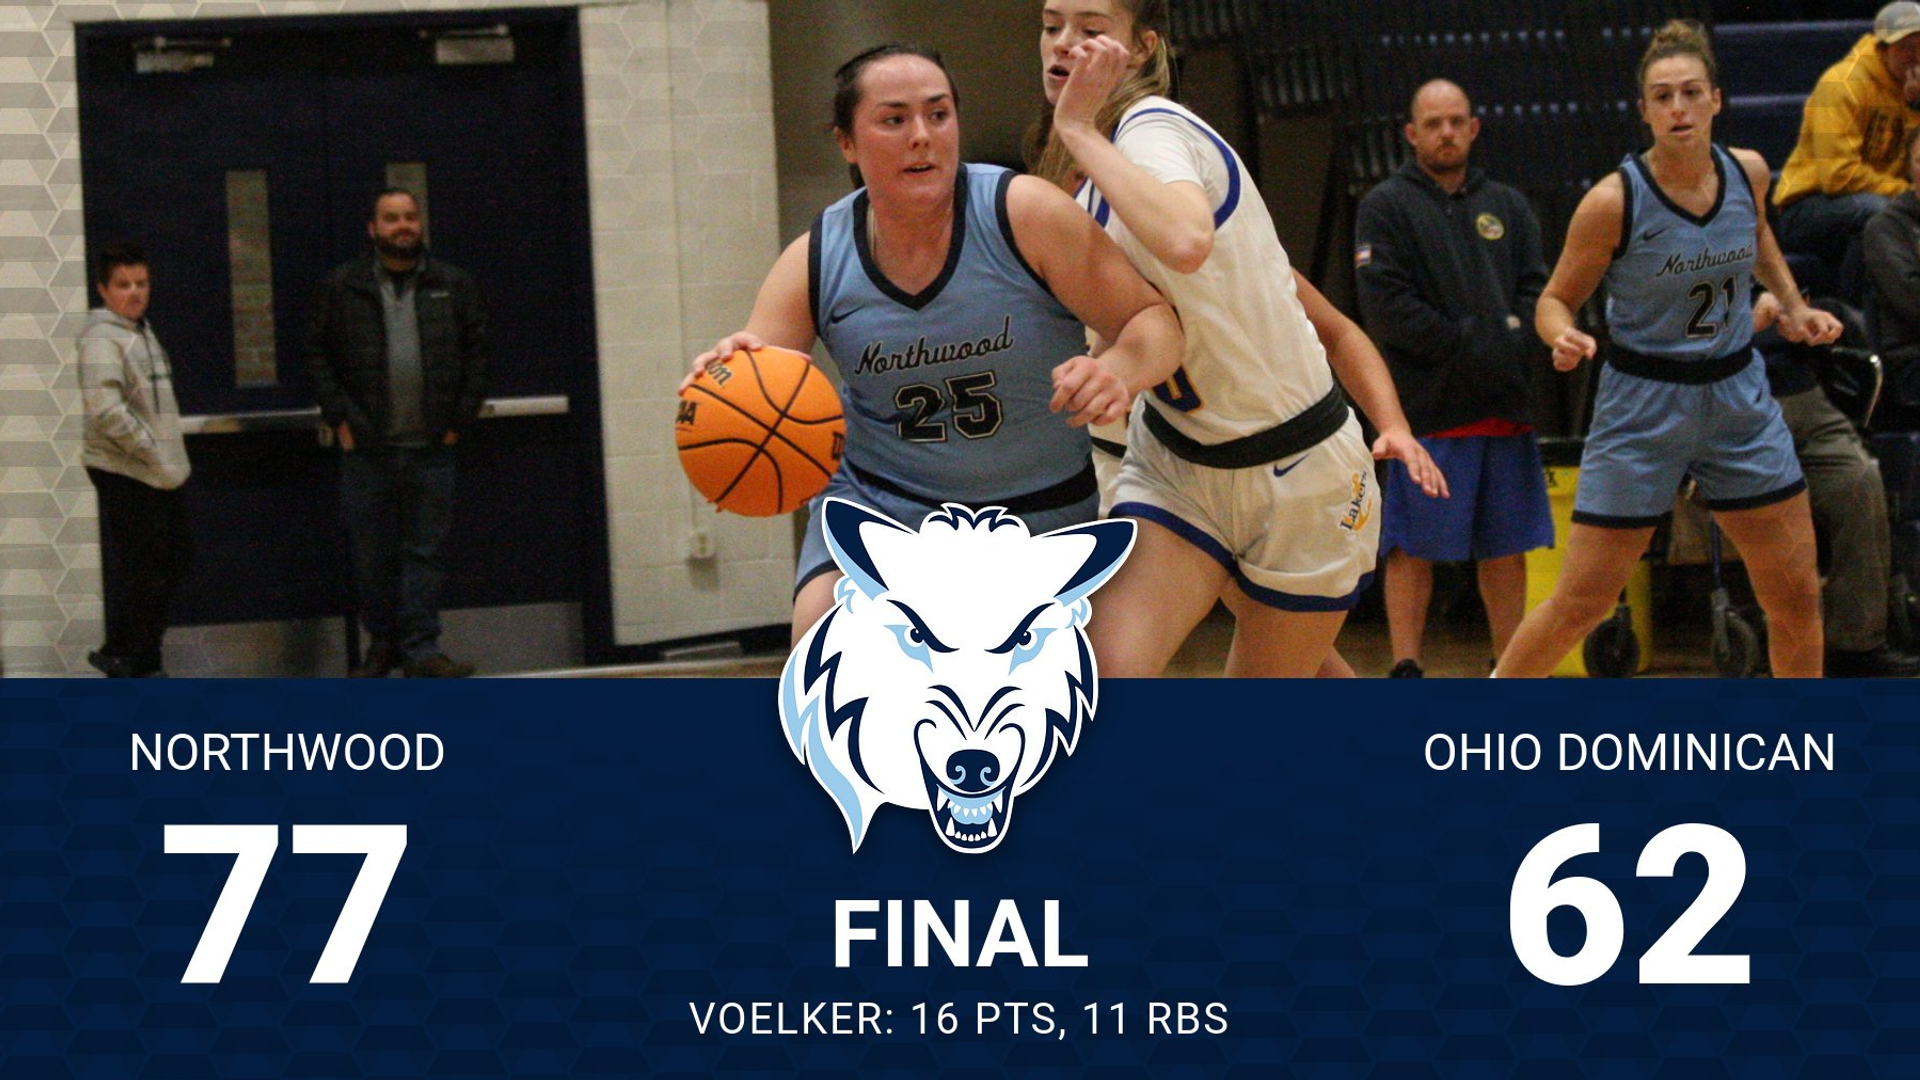 Women's Basketball Picks Up 77-62 Road Win At Ohio Dominican